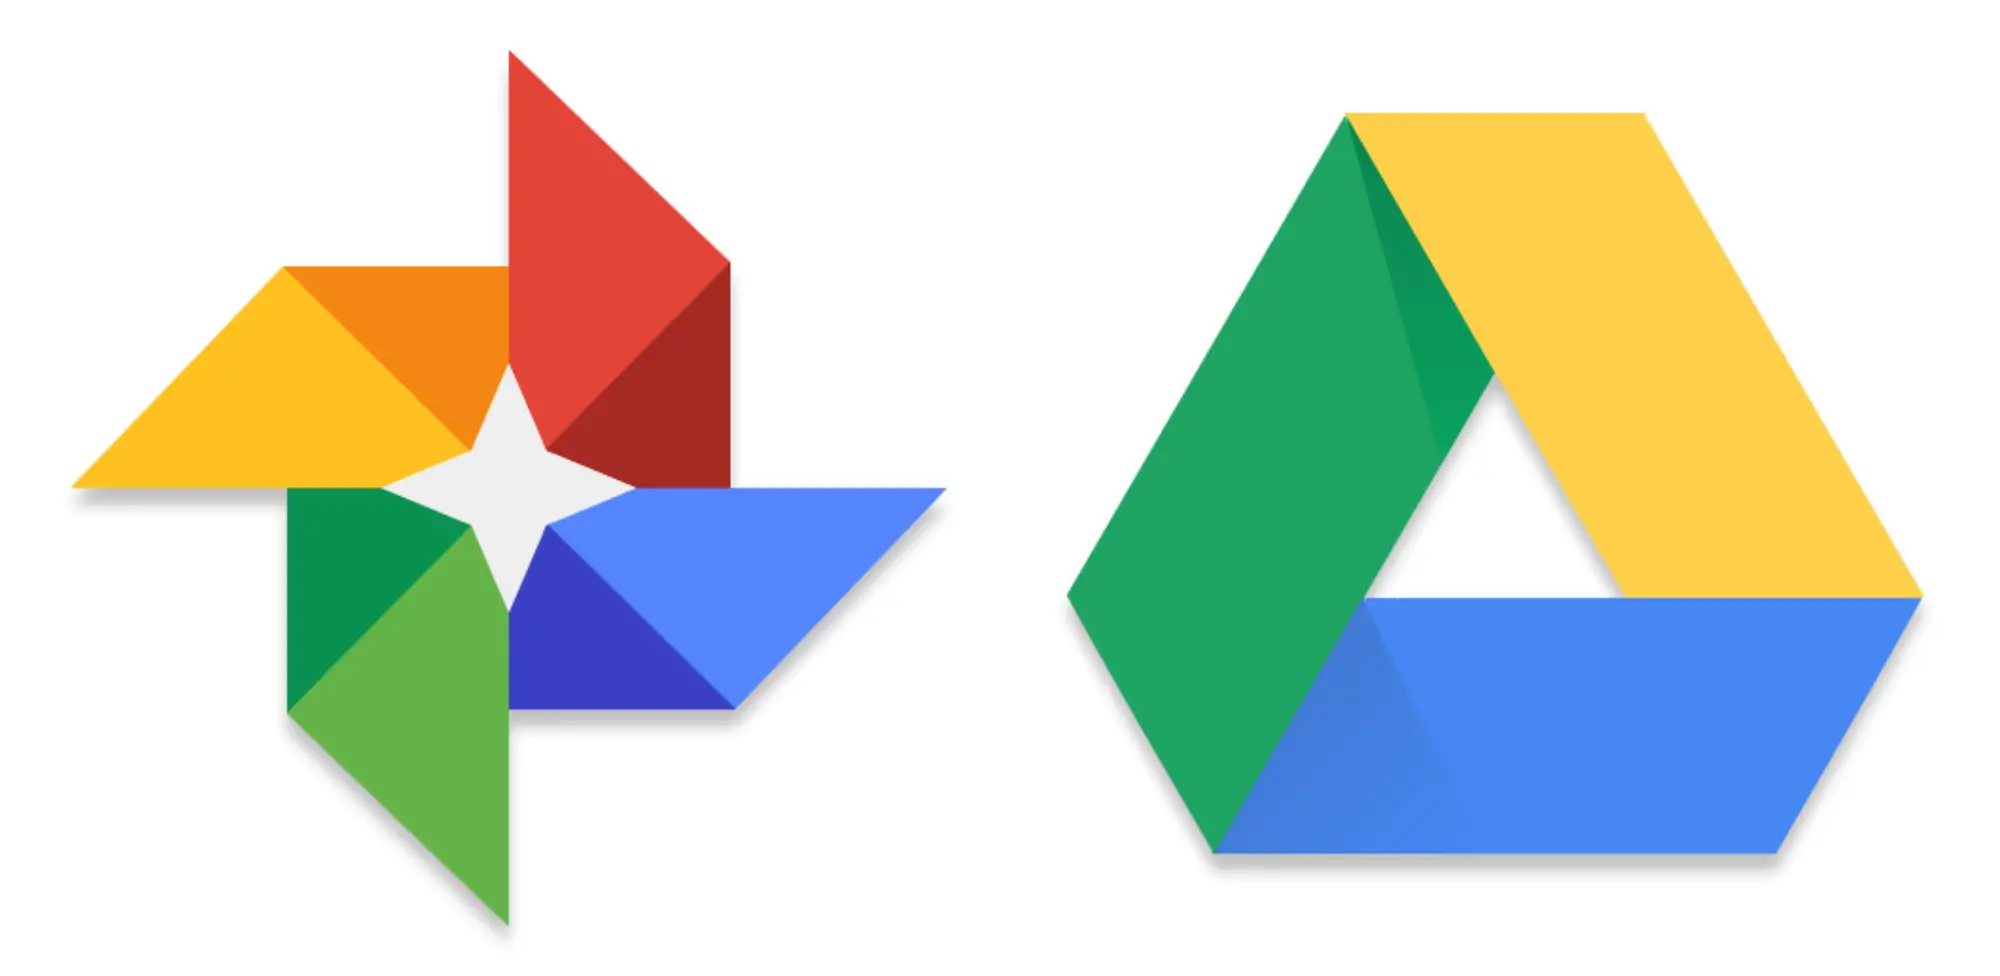 download all photos from google drive